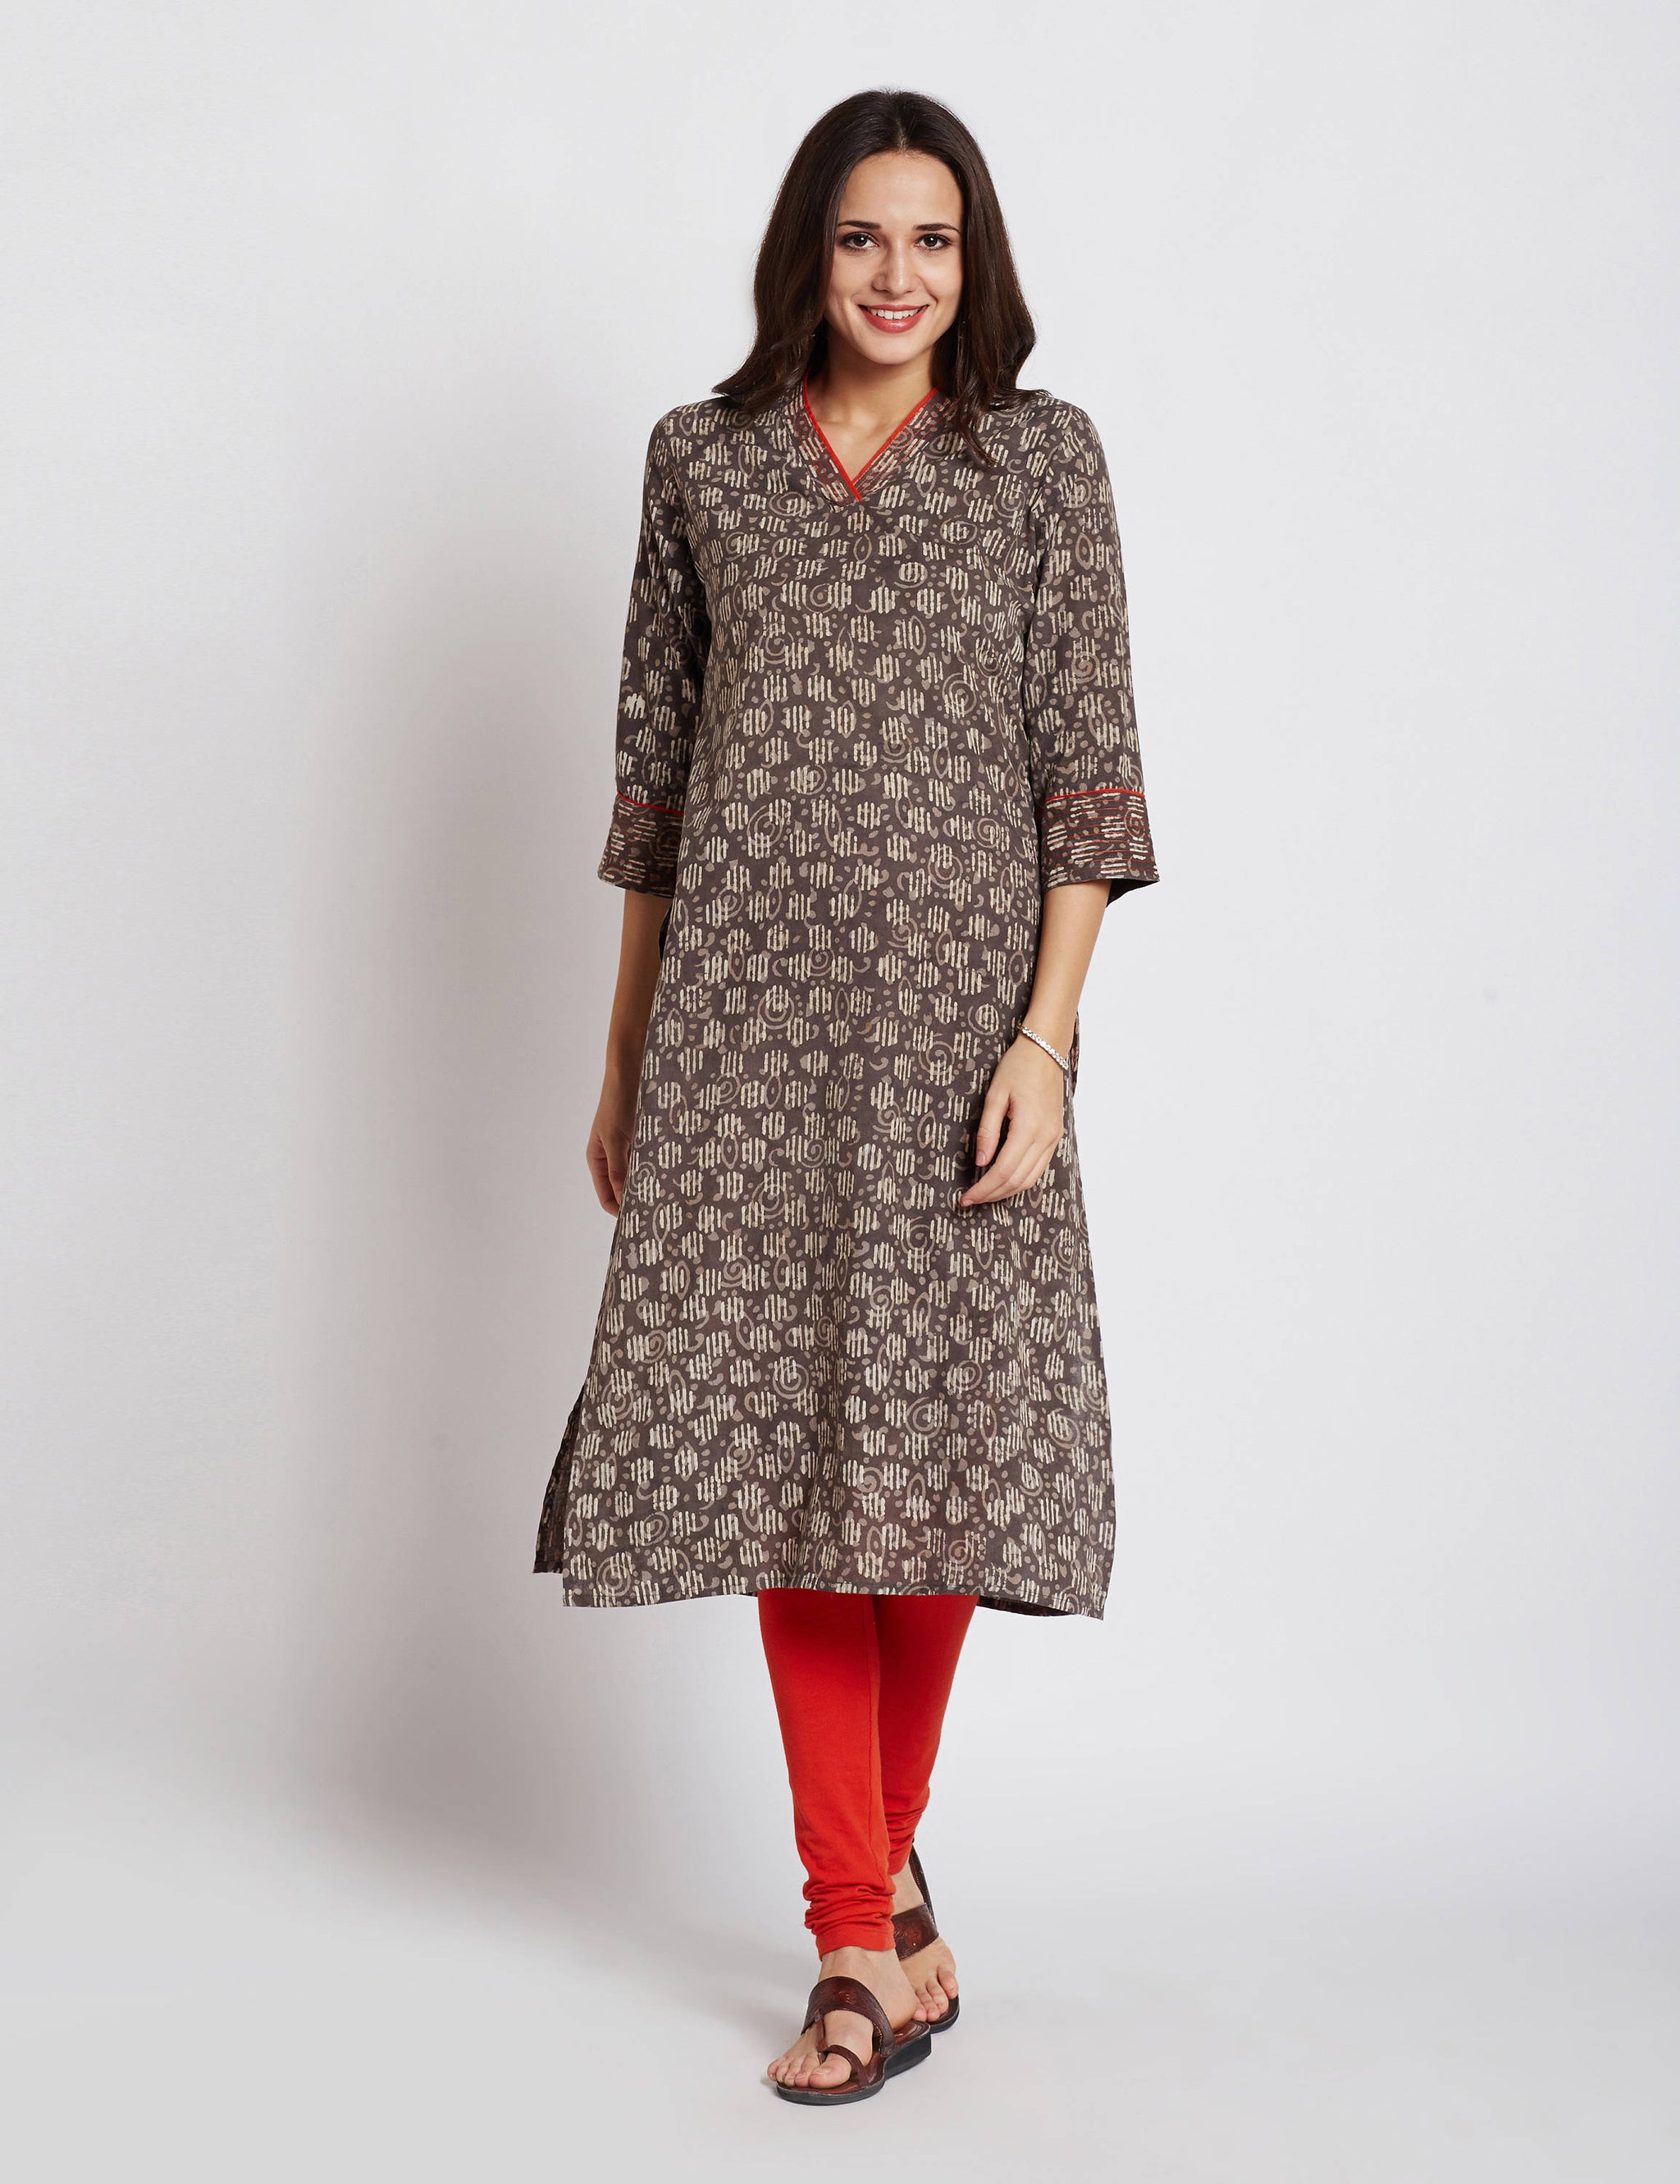 Hand block dabu printed ethnic long Indian kurta with contrast trims and orange hand embroidery on V neck and sleeves